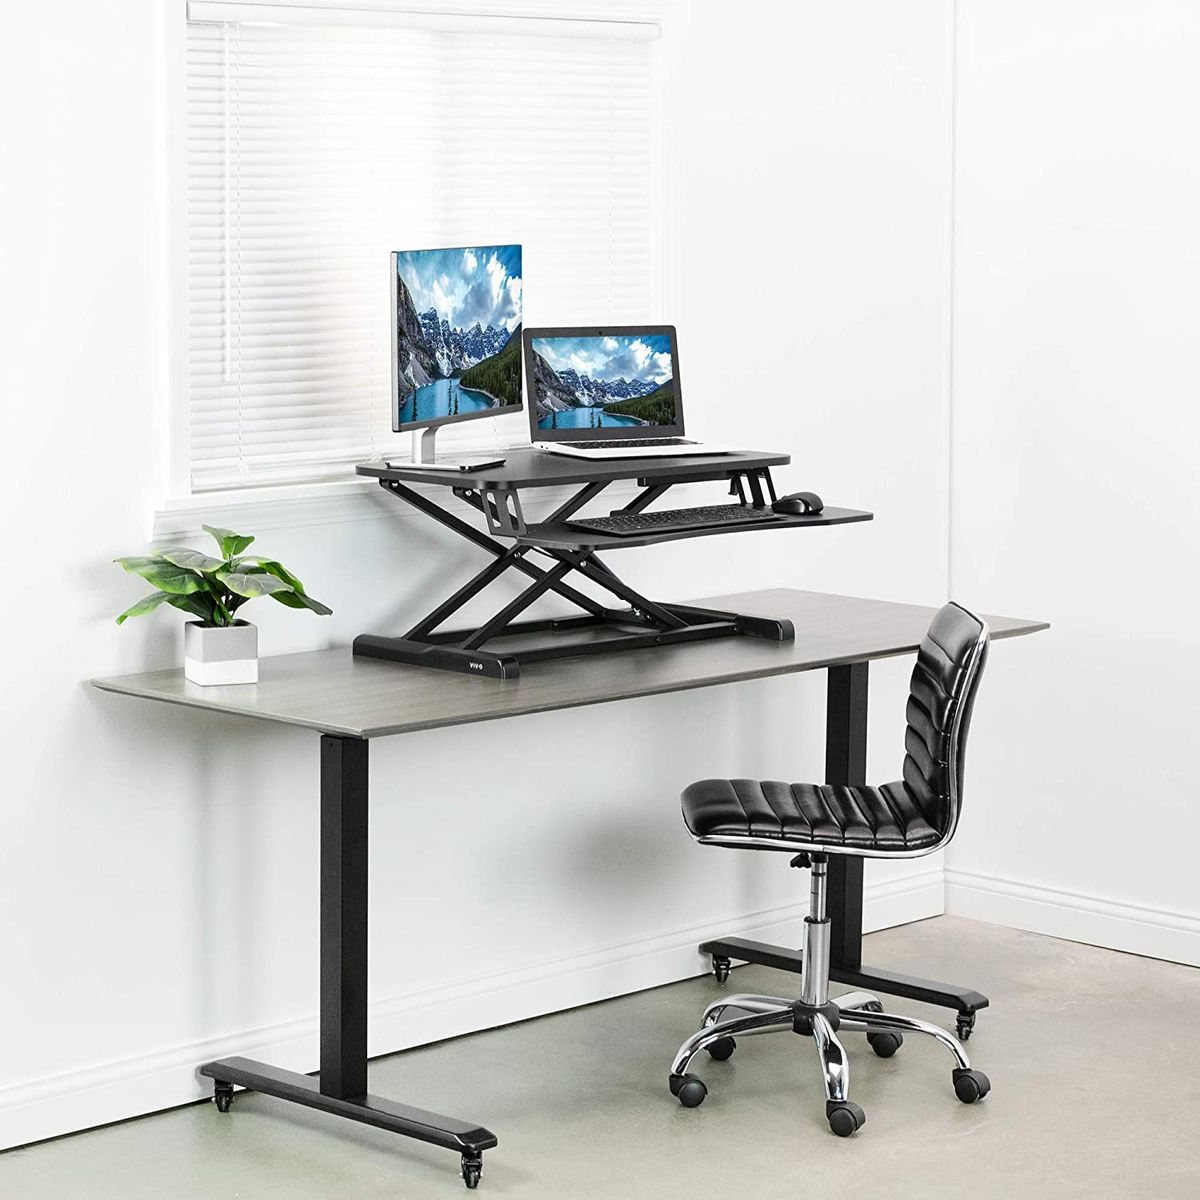 32 Inches Home Office Computer Desk Tabletop Workstatio for Dual Monitor Riser White MELLCOM Standing Desk Height Adjustable Converter Stand up Desk